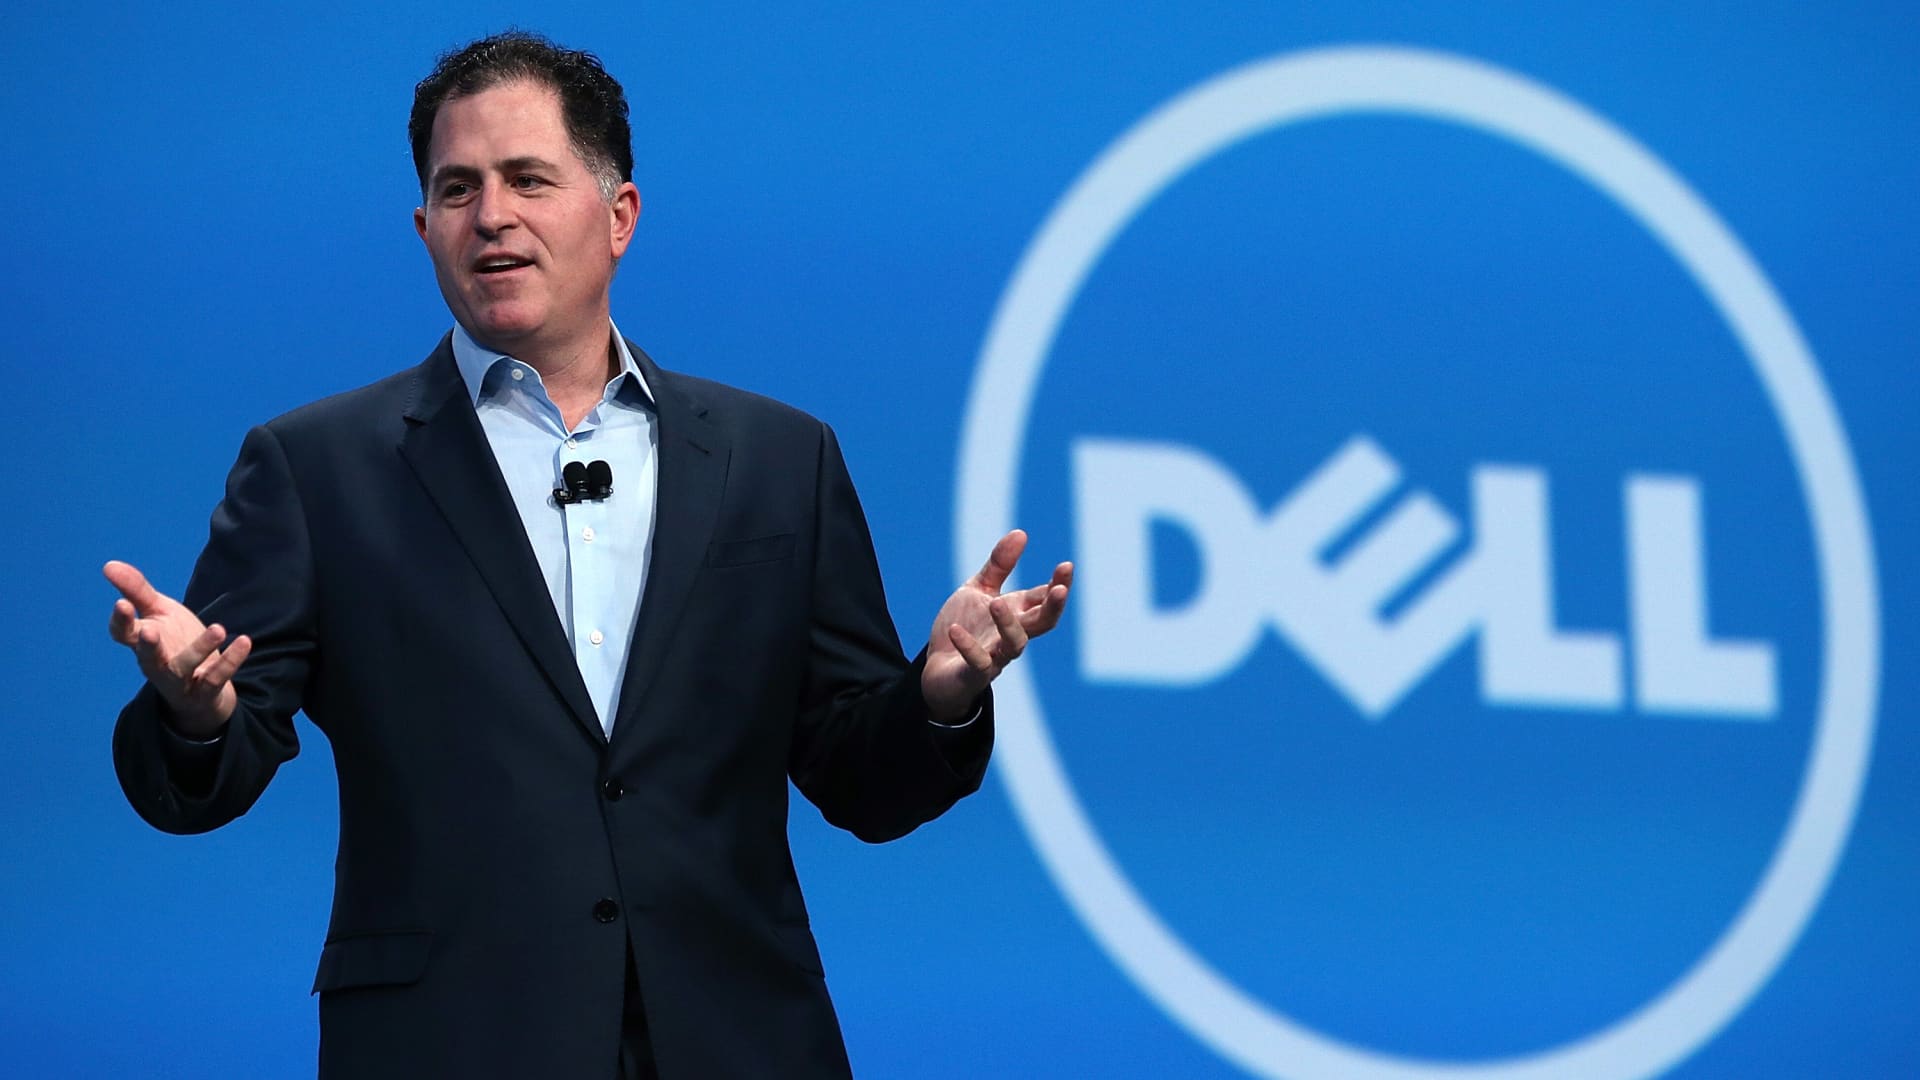 Dell shares have best day since return to stock market in 2018